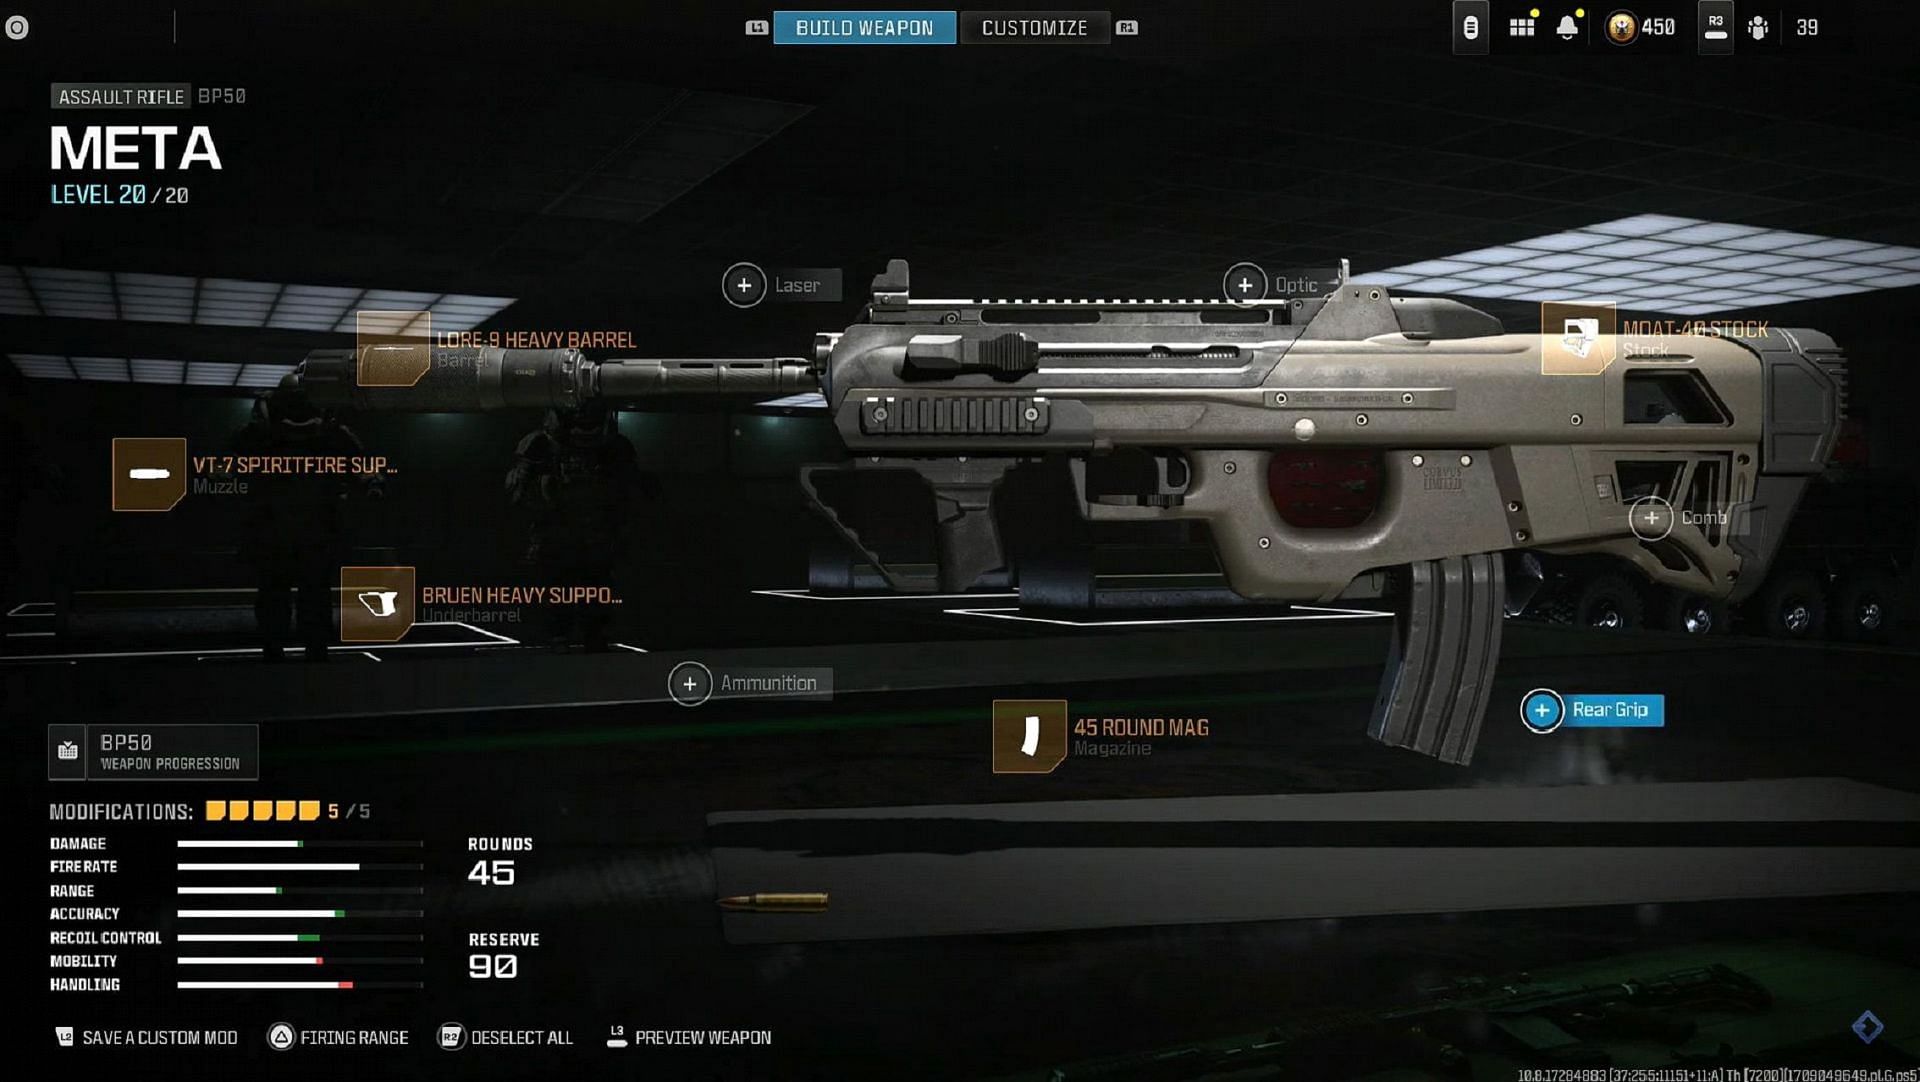 BP50 in Modern Warfare 3 (Image via Activision || YouTube/ChainFeeds)